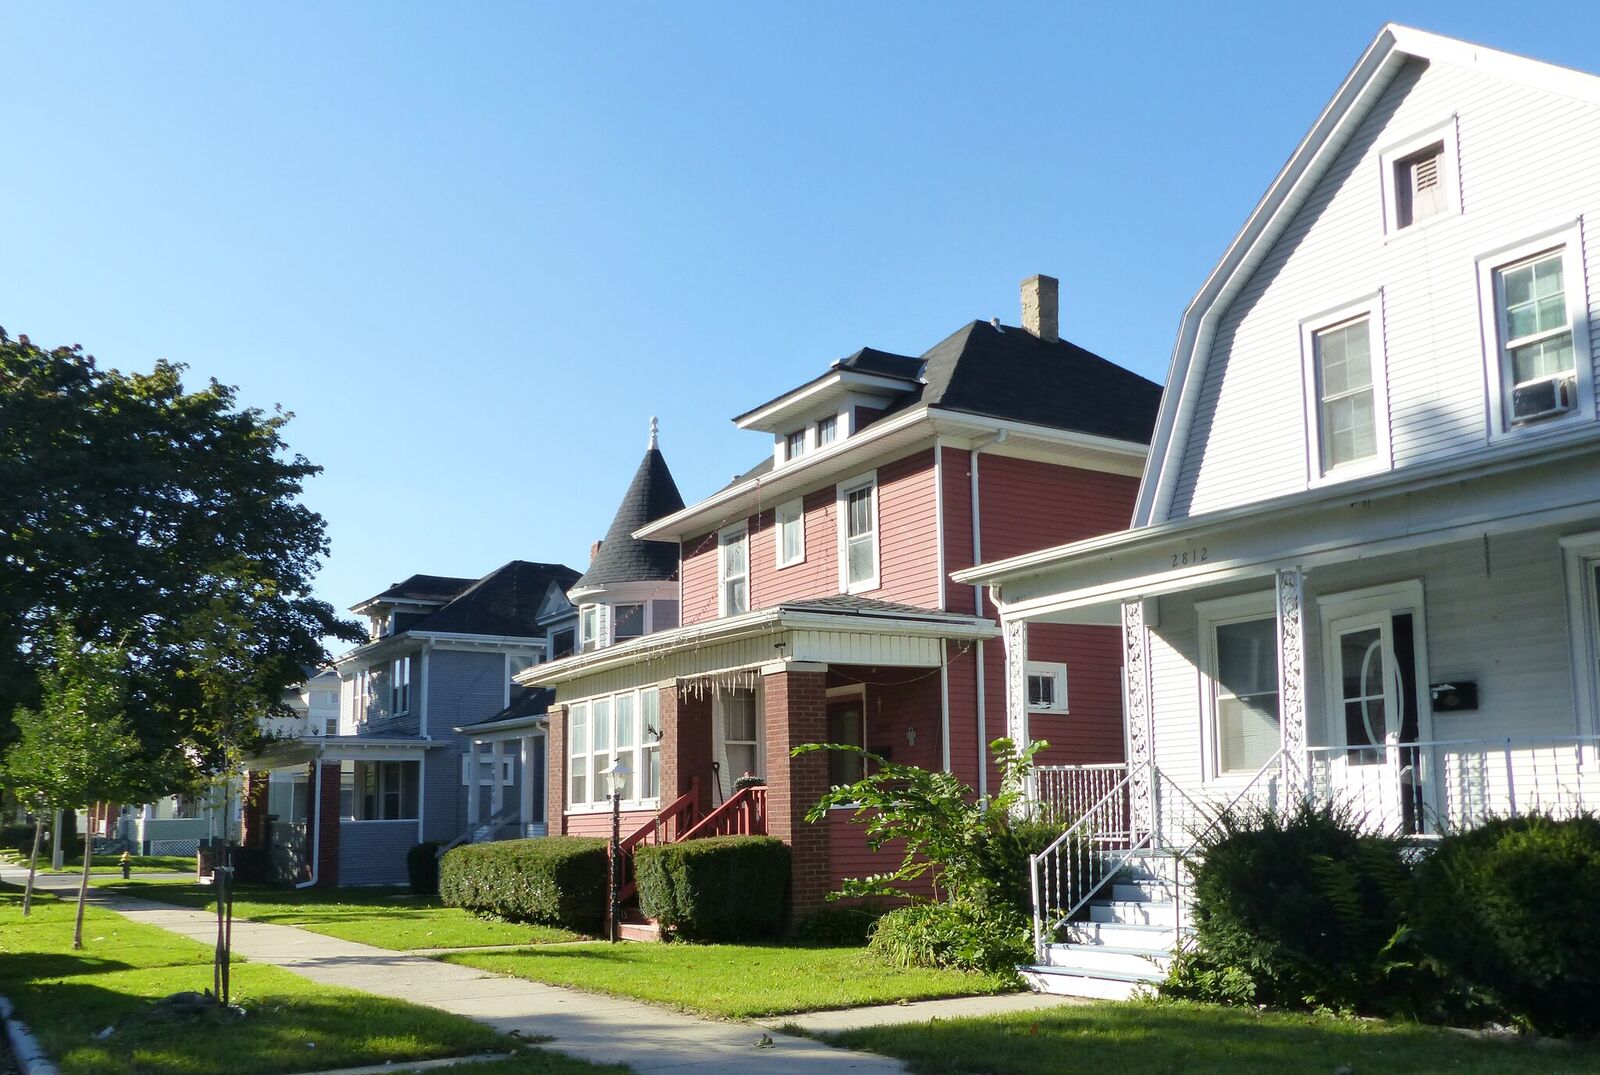 Racine's affordable cost of living, housing value and rental options